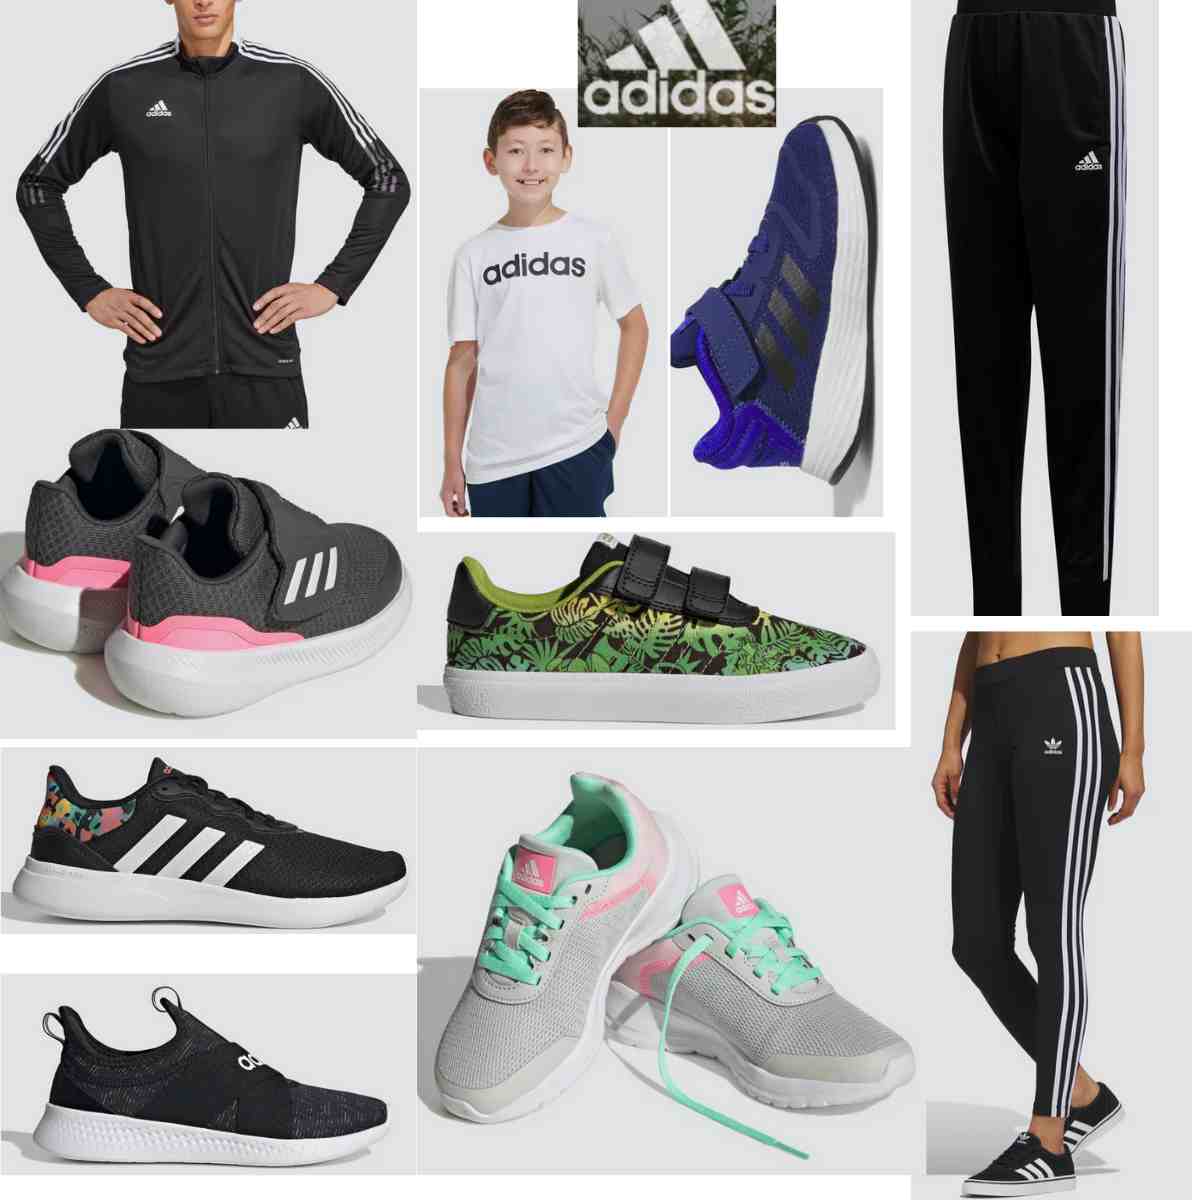 Extra on Adidas styles Shop Premium Outlets plus free shipping all orders | Smart Savers